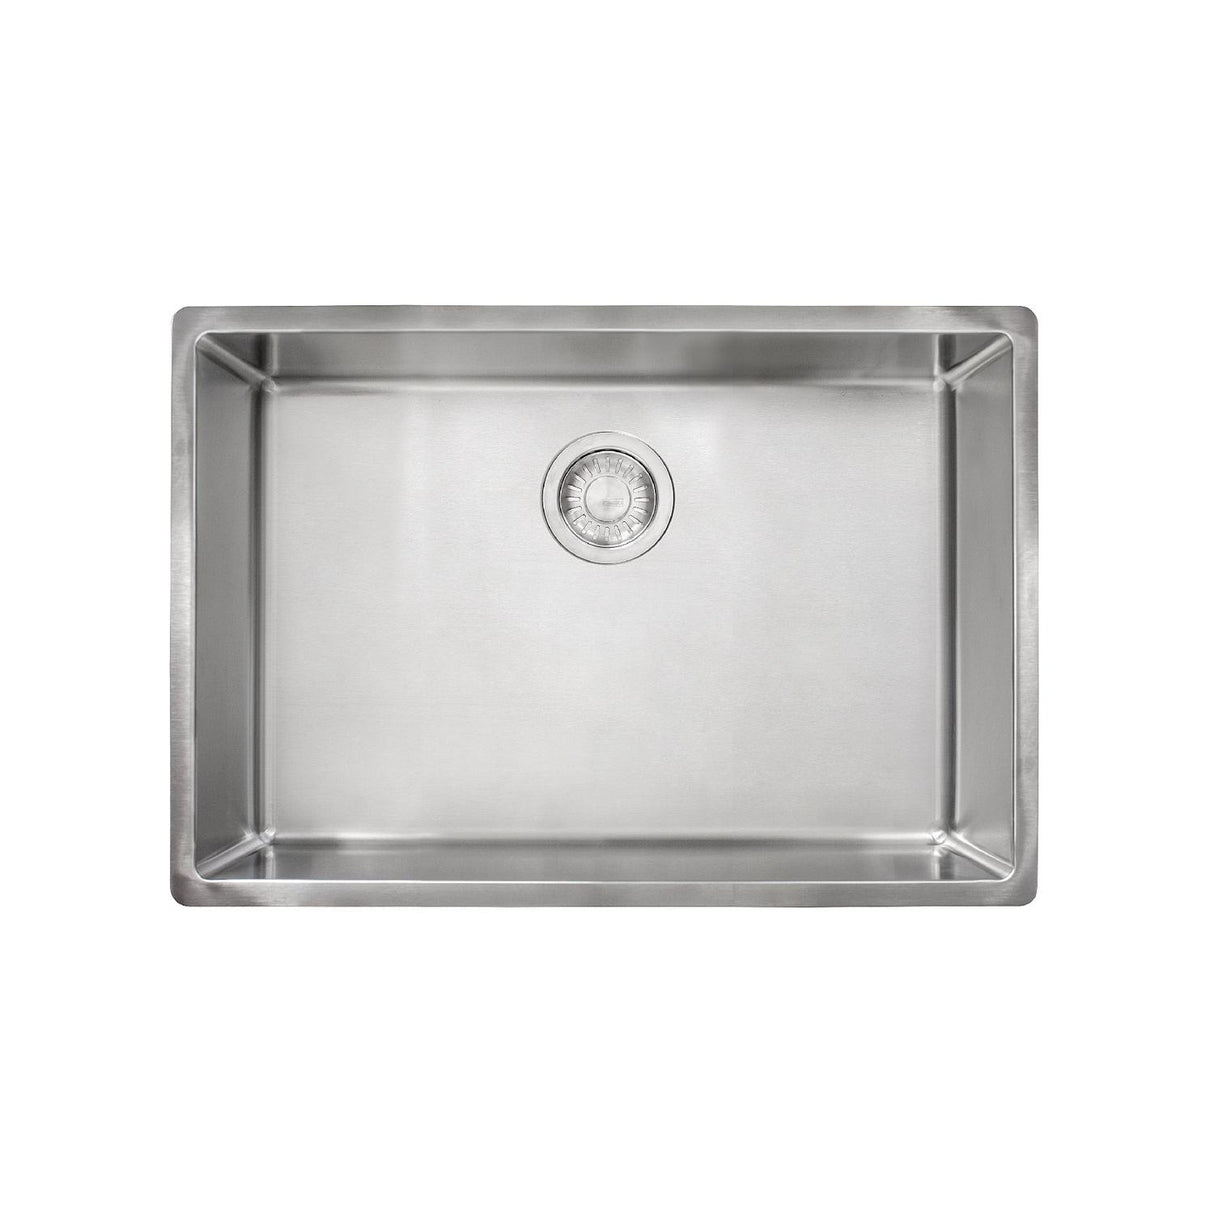 FRANKE CUX11025 Cube 26.6-in. x 17.7-in. 18 Gauge Stainless Steel Undermount Single Bowl Kitchen Sink - CUX11025 In Pearl